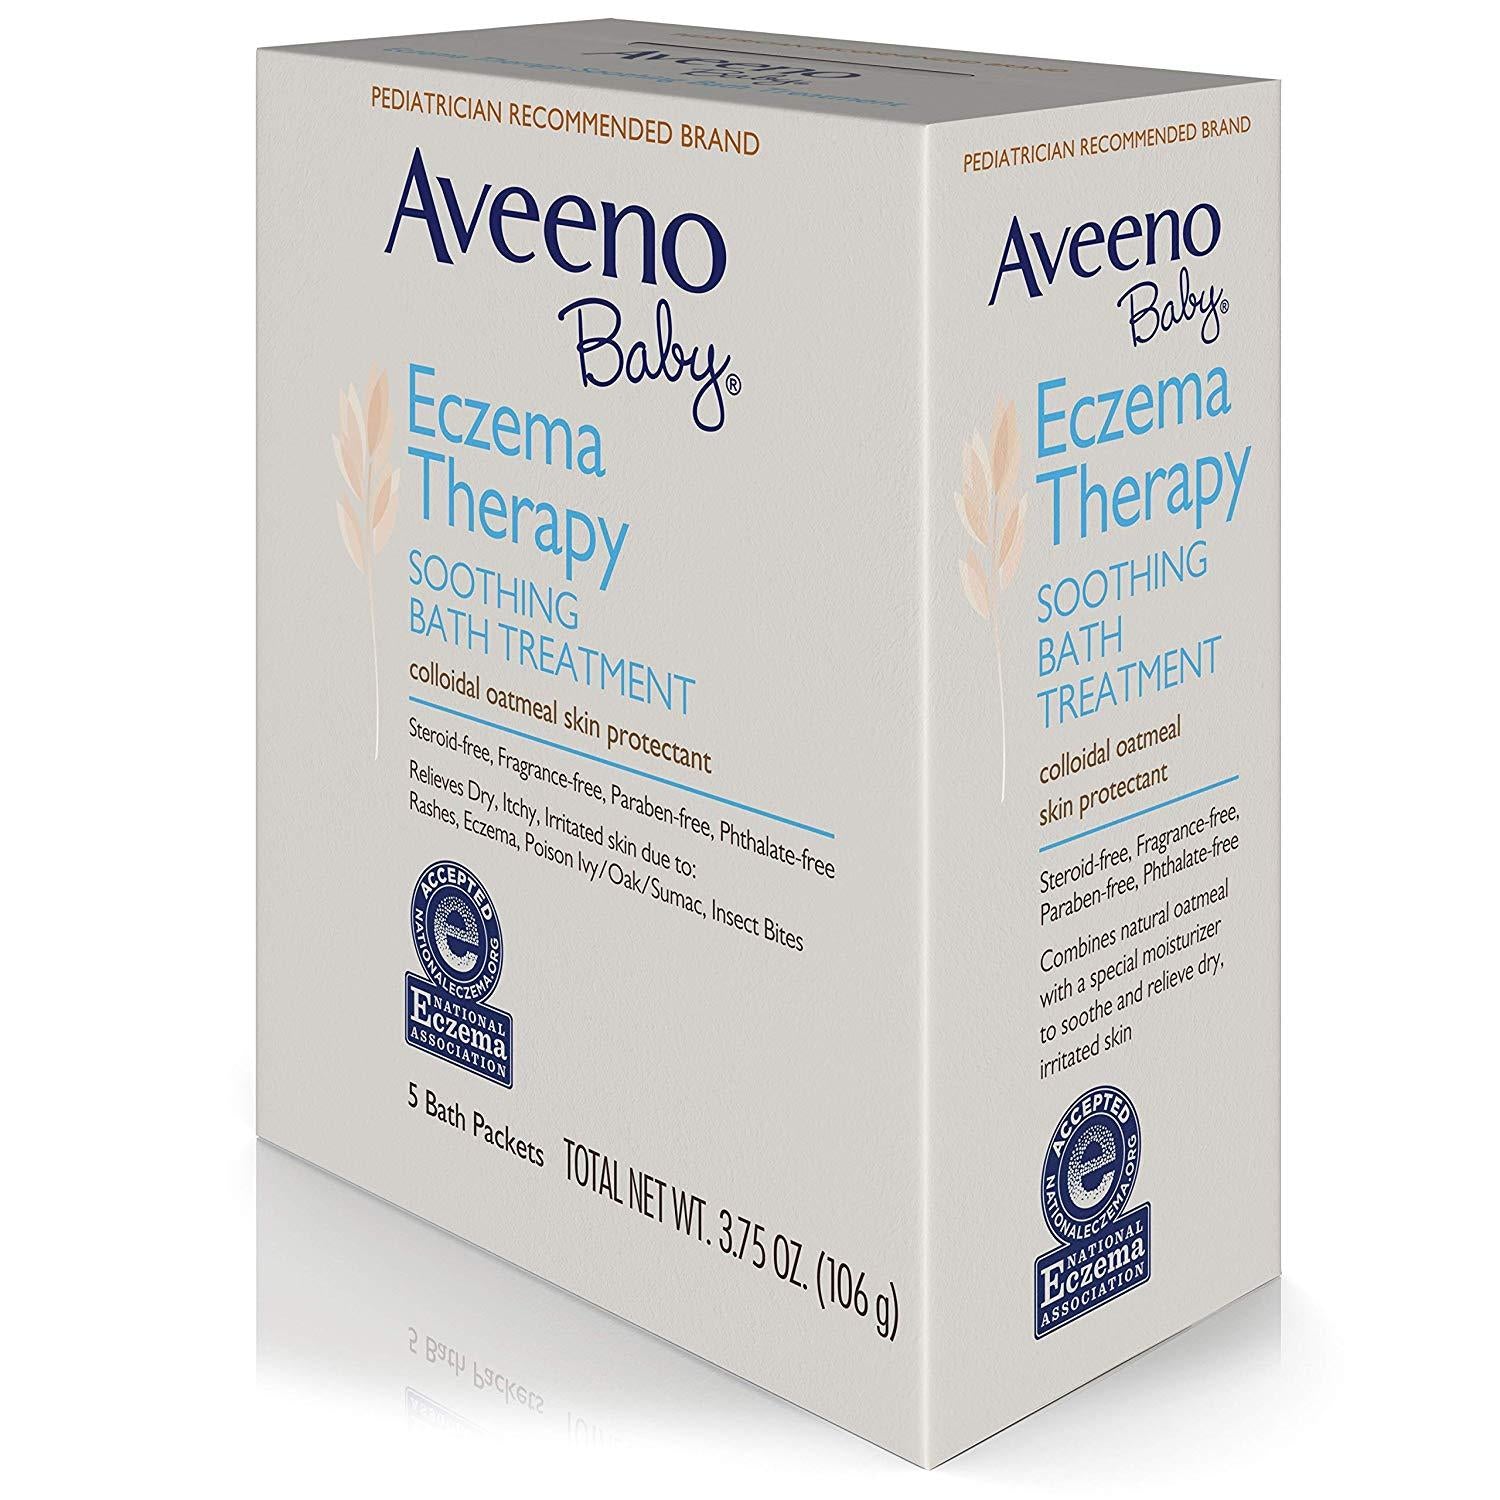  Aveeno Baby Eczema Therapy Moisturizing Cream, Natural  Colloidal Oatmeal & Vitamin B5, Baby Eczema Cream for Dry, Itchy, Irritated  Skin Due to Eczema, Paraben- & Steroid-Free, 7.3 oz : Baby